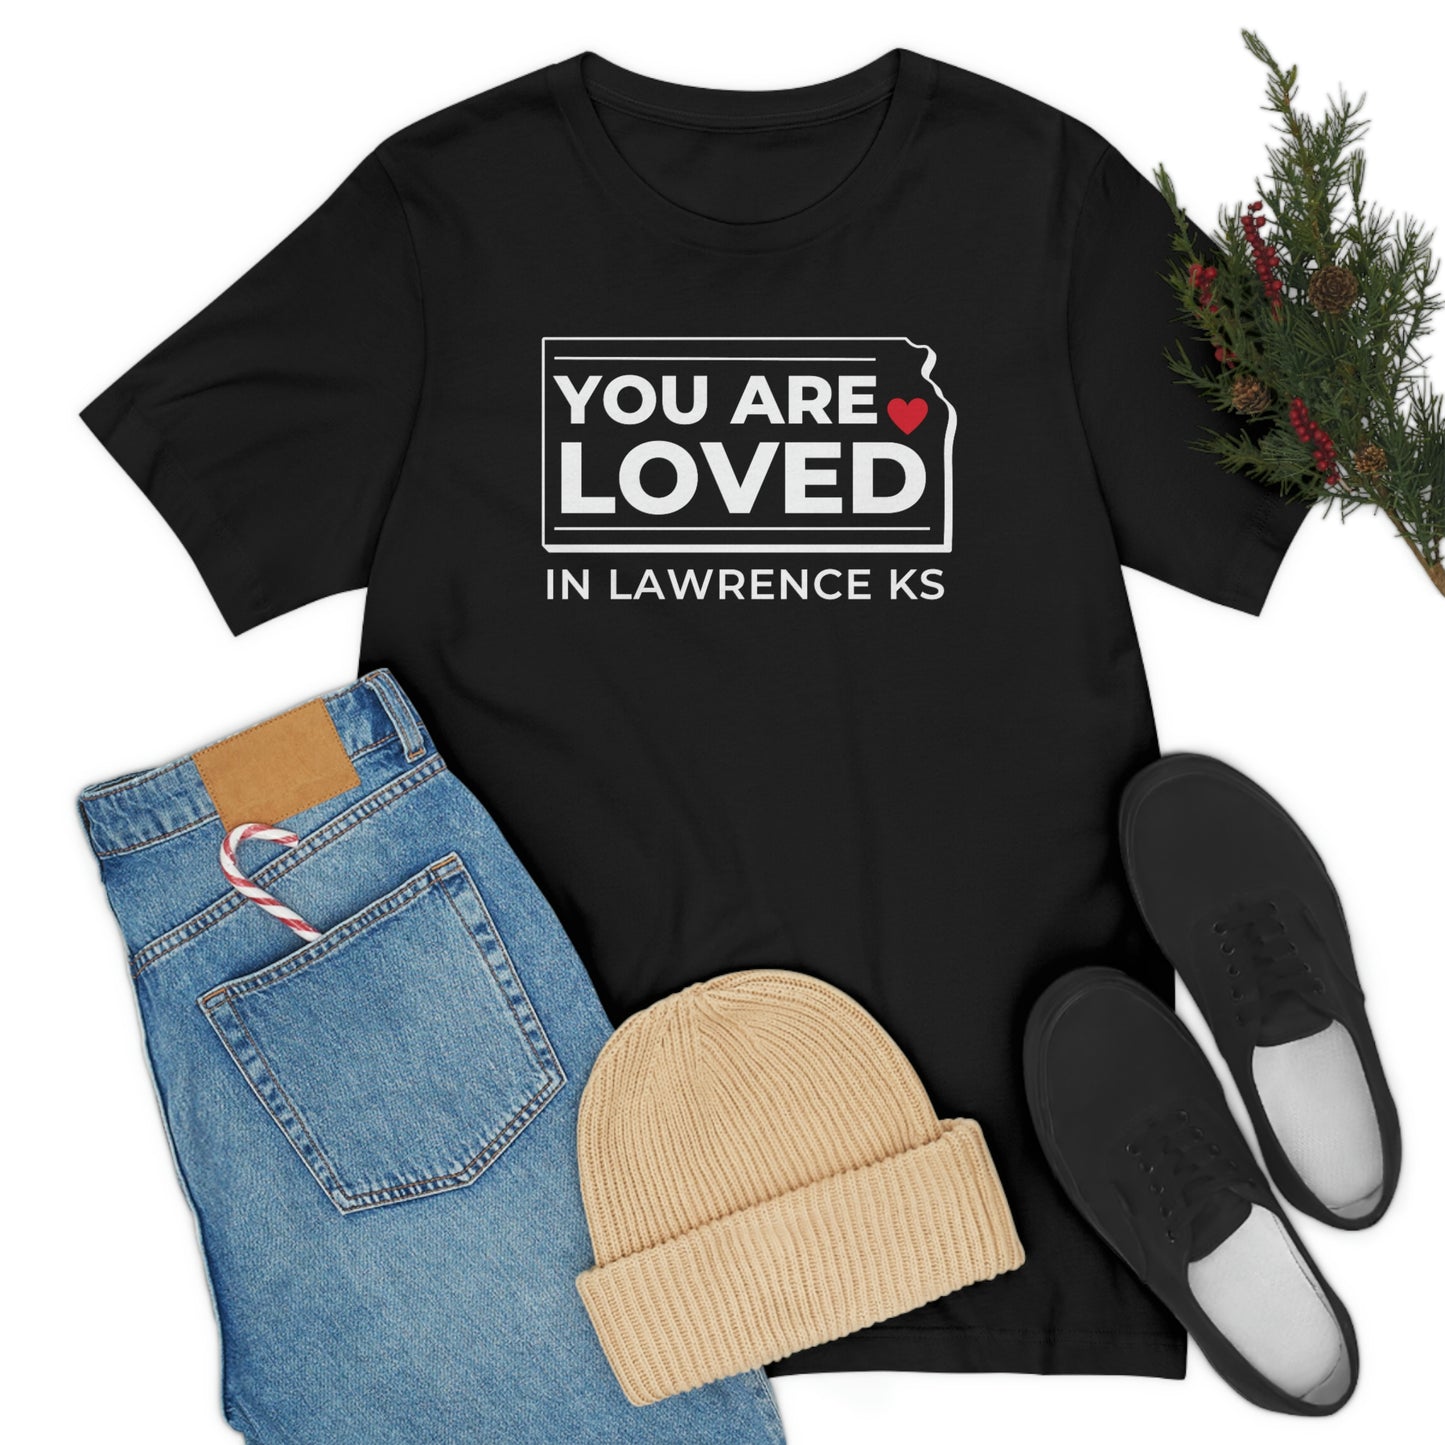 "YOU ARE LOVED ❤️ in Lawrence KS" T-Shirt [BLACK]